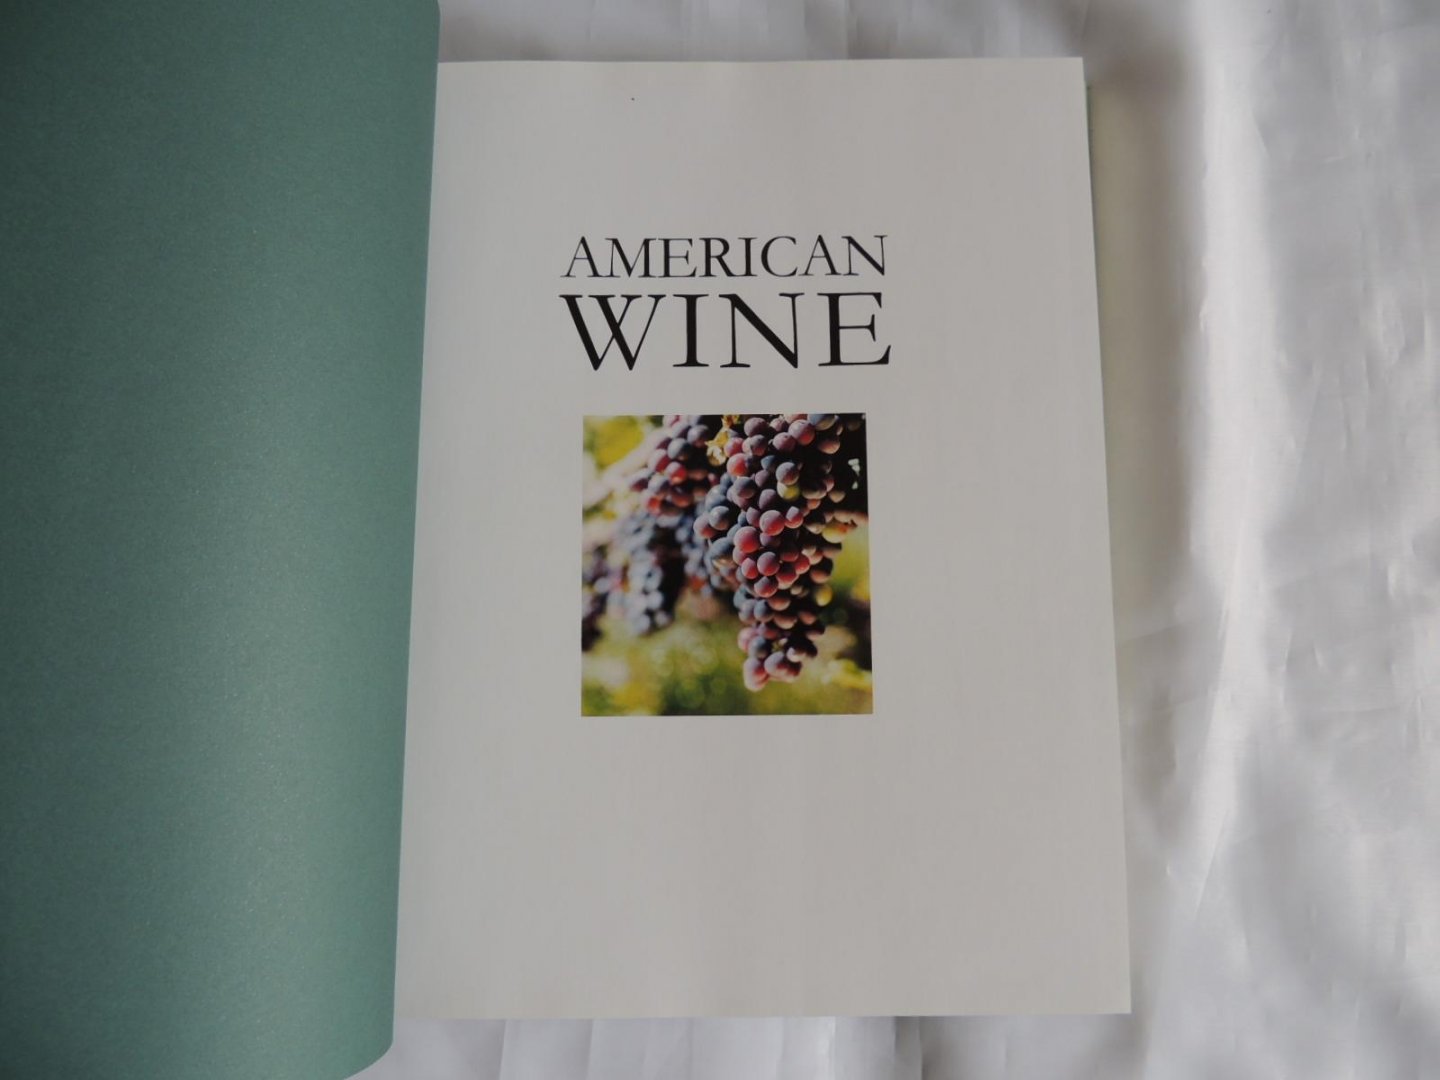 Robinson, Jancis - Murphy, Linda - American Wine - The Ultimate Companion to the Wines and Wineries of the United States